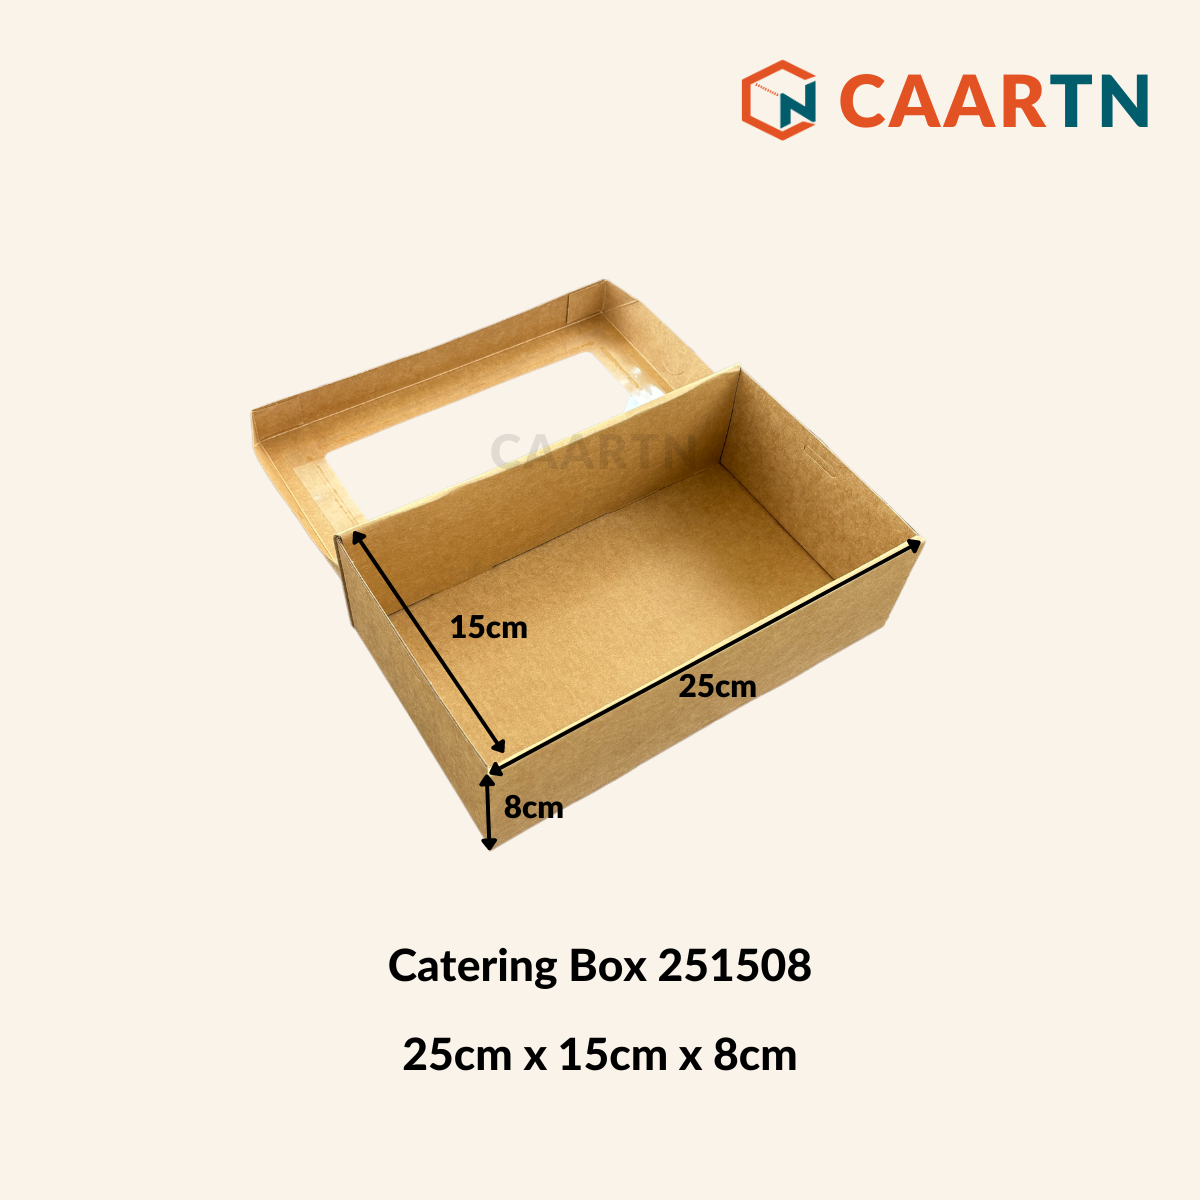 Catering Box 251508